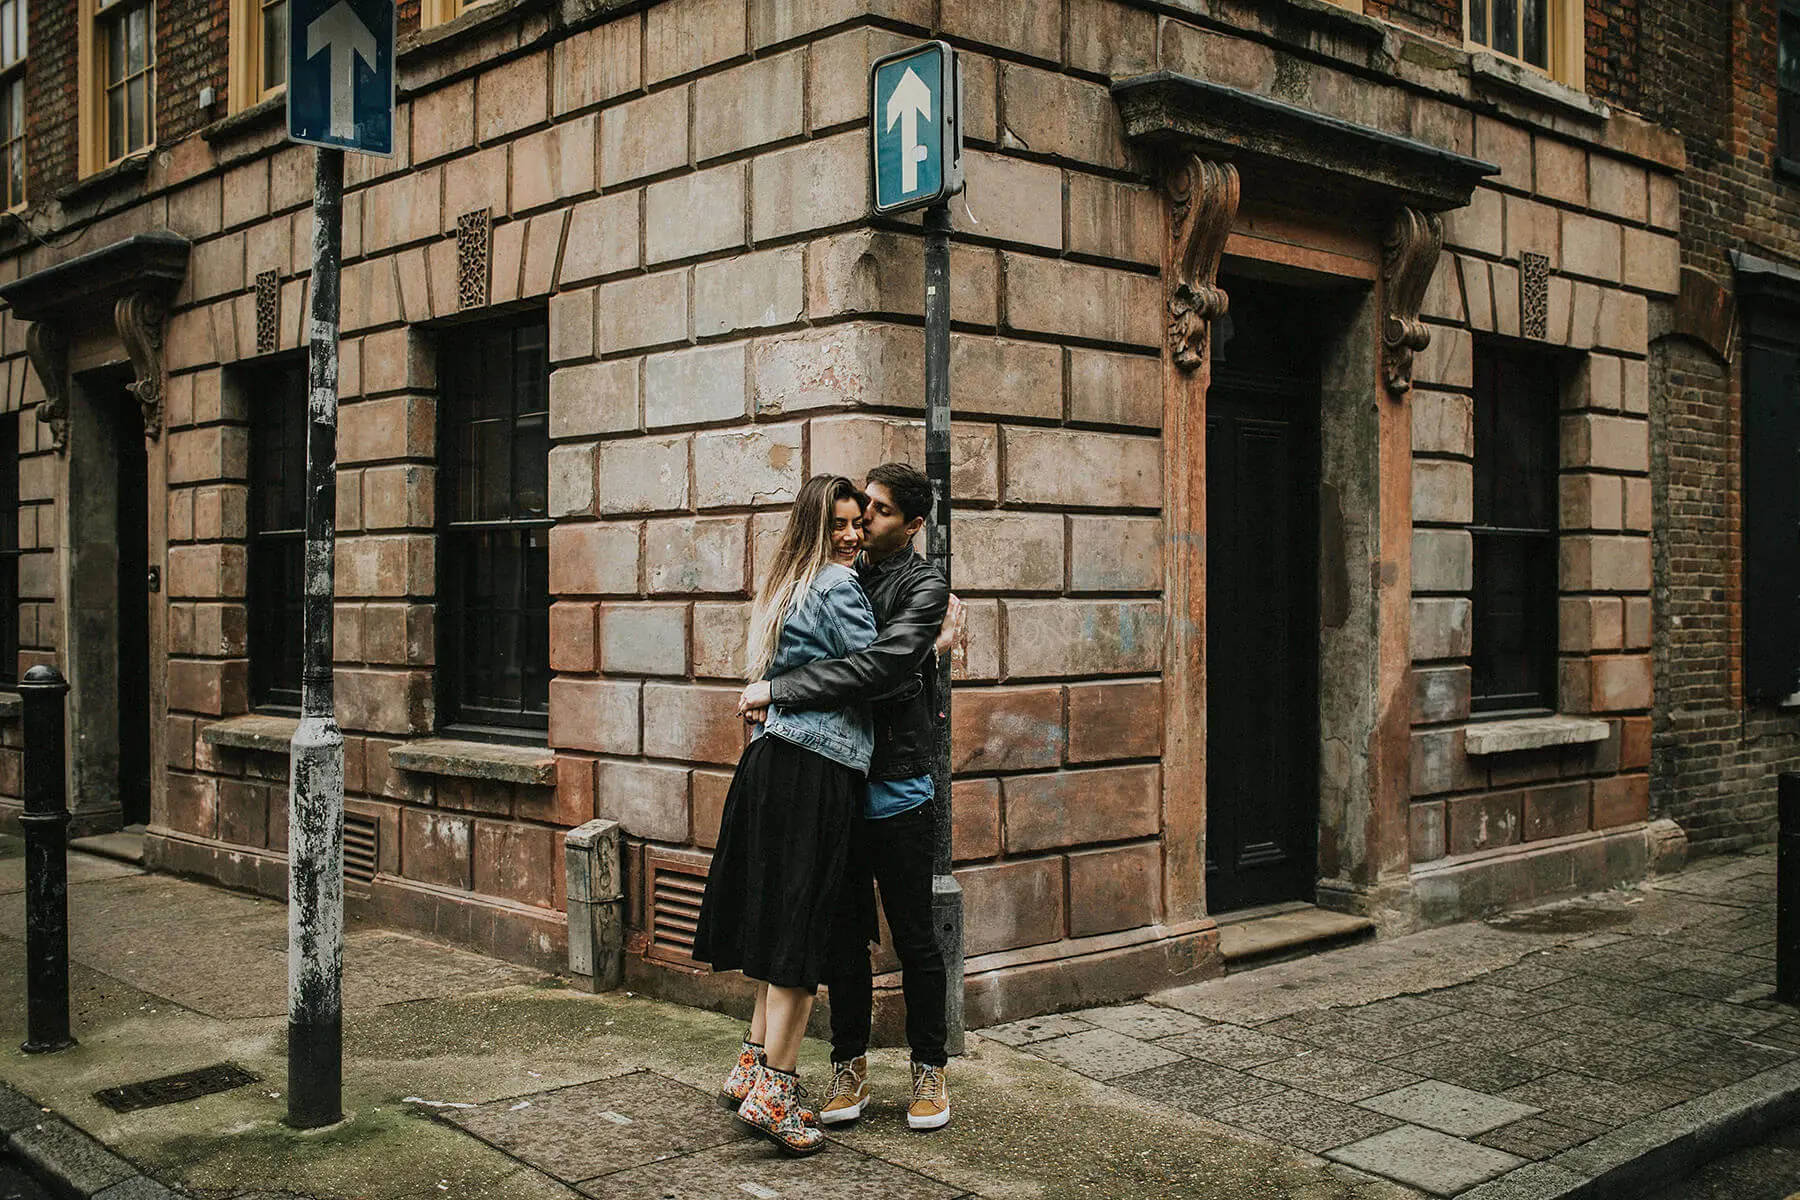  In an old city alley, a couple shares an embrace on the cobblestone sidewalk. The woman, in a black skirt and denim jacket, is smiling as she hugs the man, who is wearing a black leather jacket and jeans. Behind them, a vintage building with brown stone faÃ§ade and barred windows adds a historical touch to the romantic scene. An arrow sign pointing upwards adds a symbolic element to the composition.